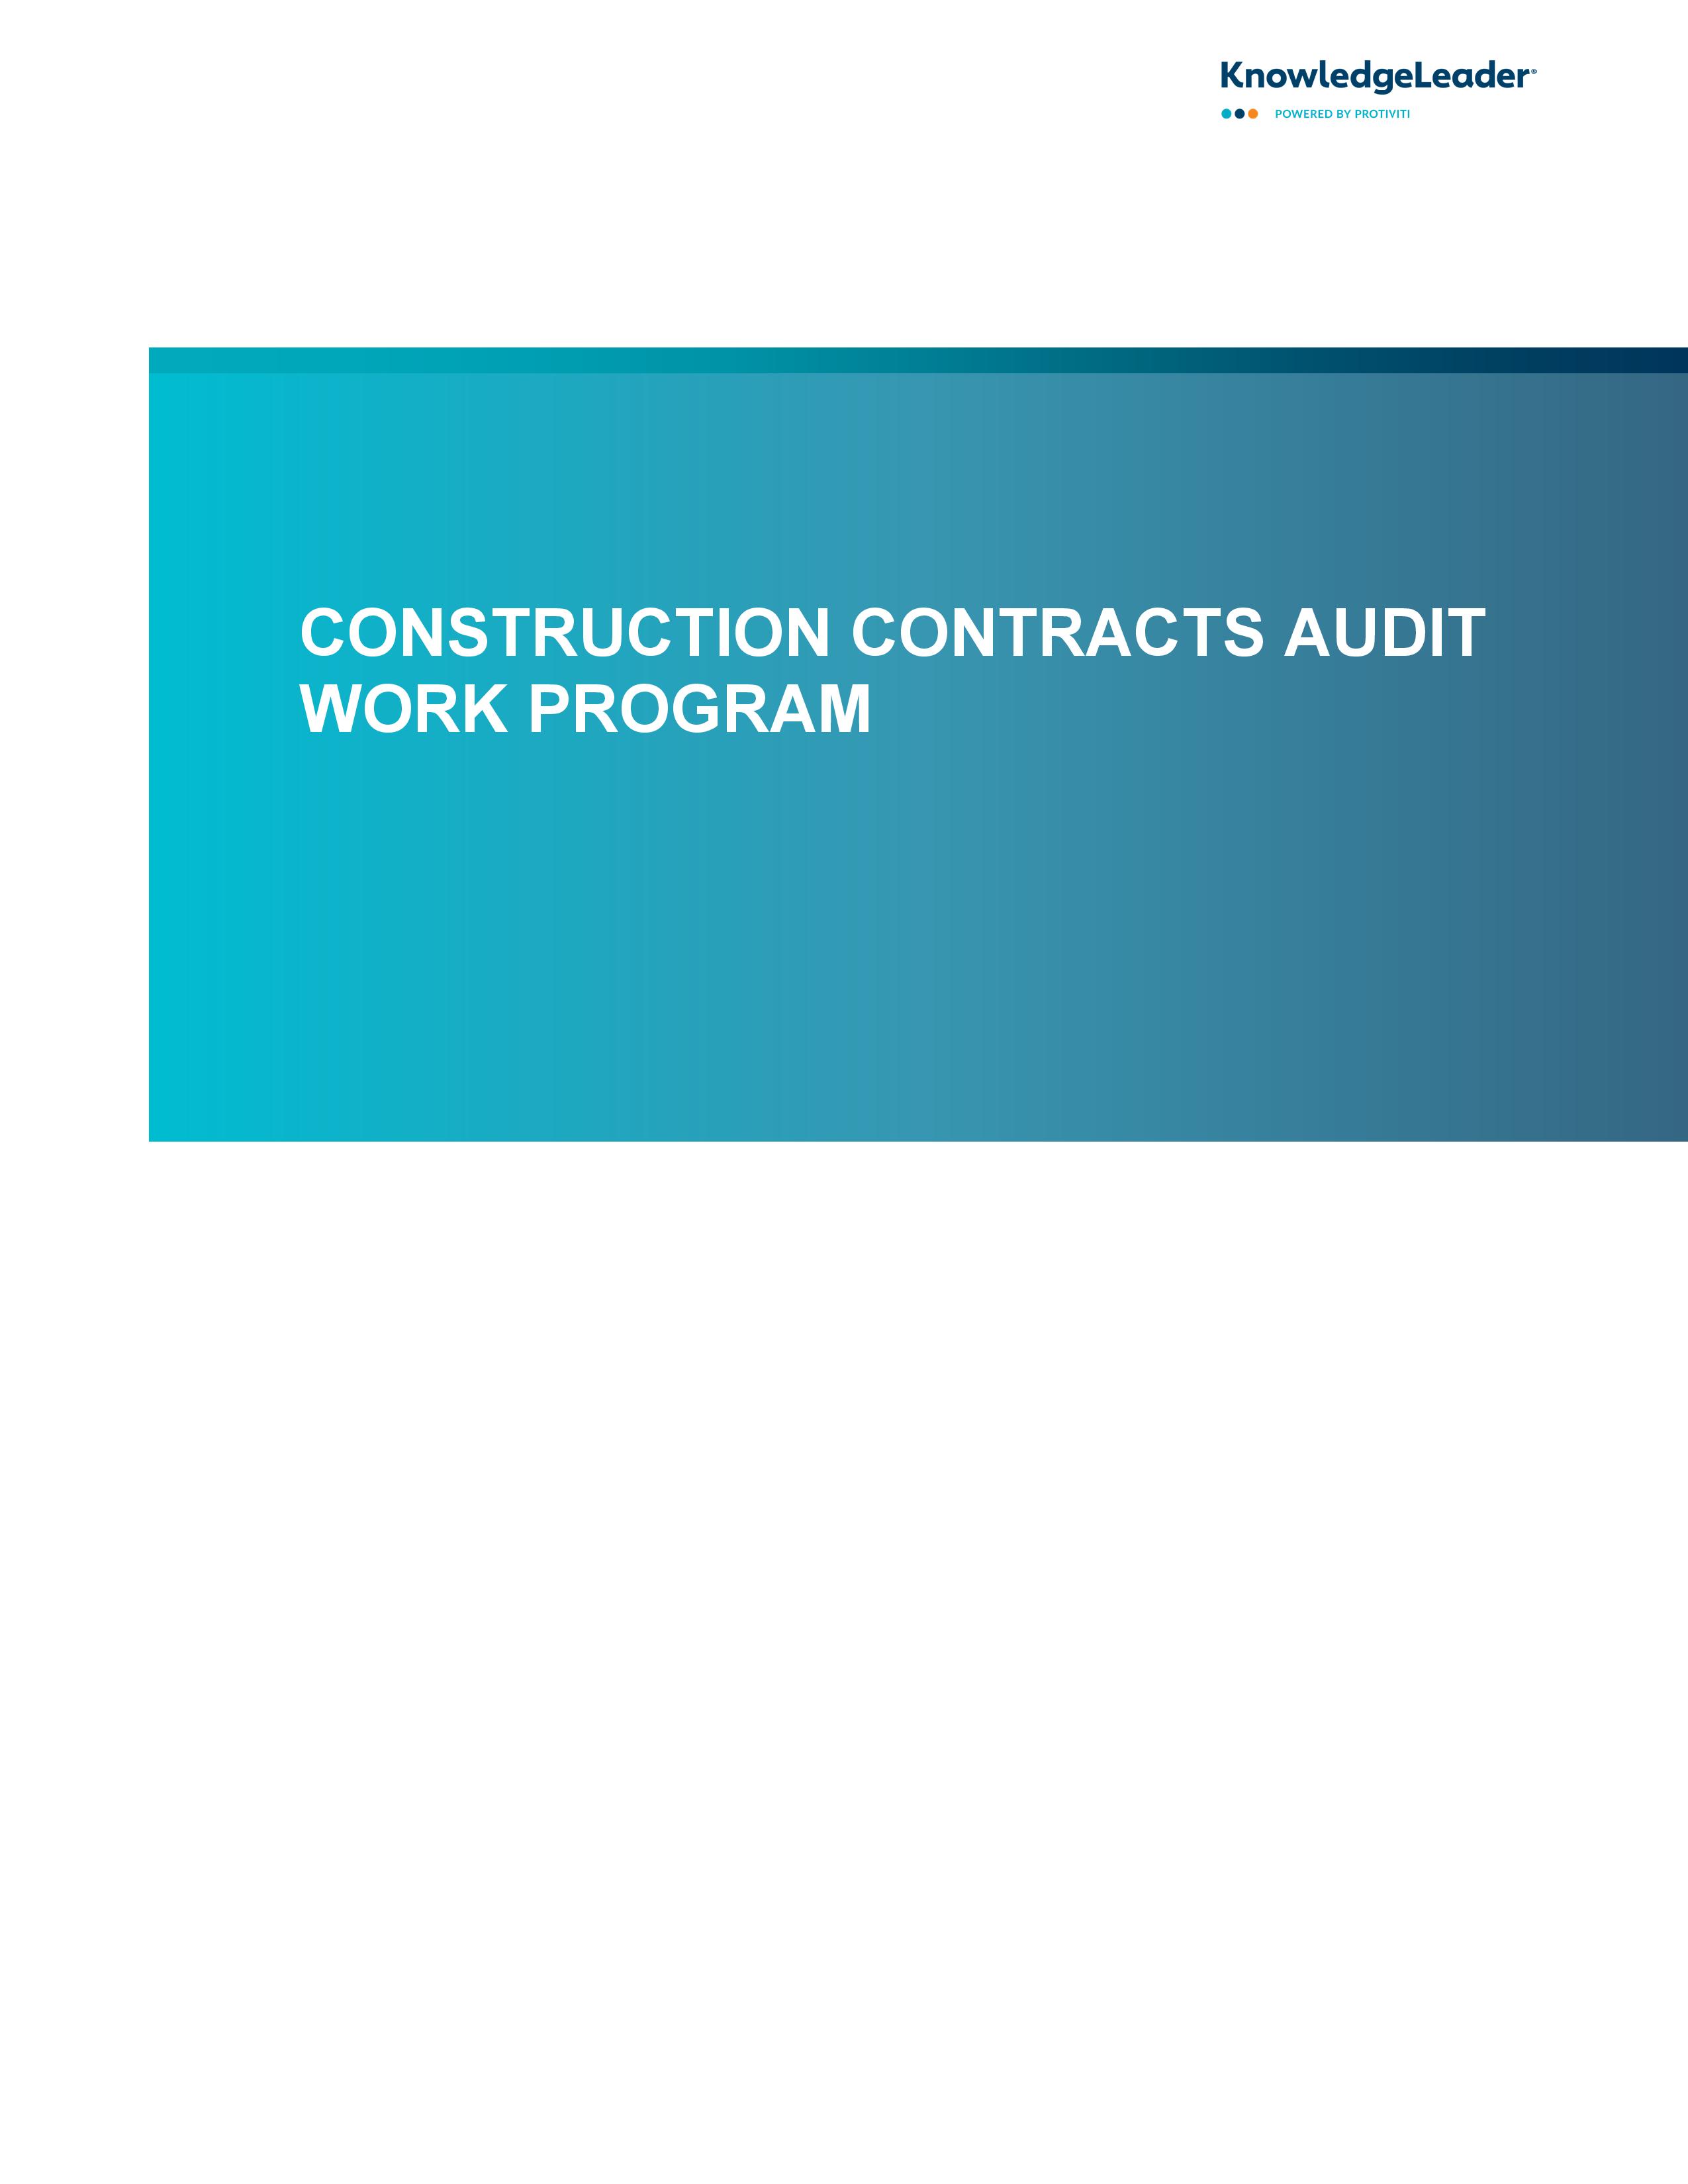 Screenshot of the first page of Construction Contracts Audit Work Program